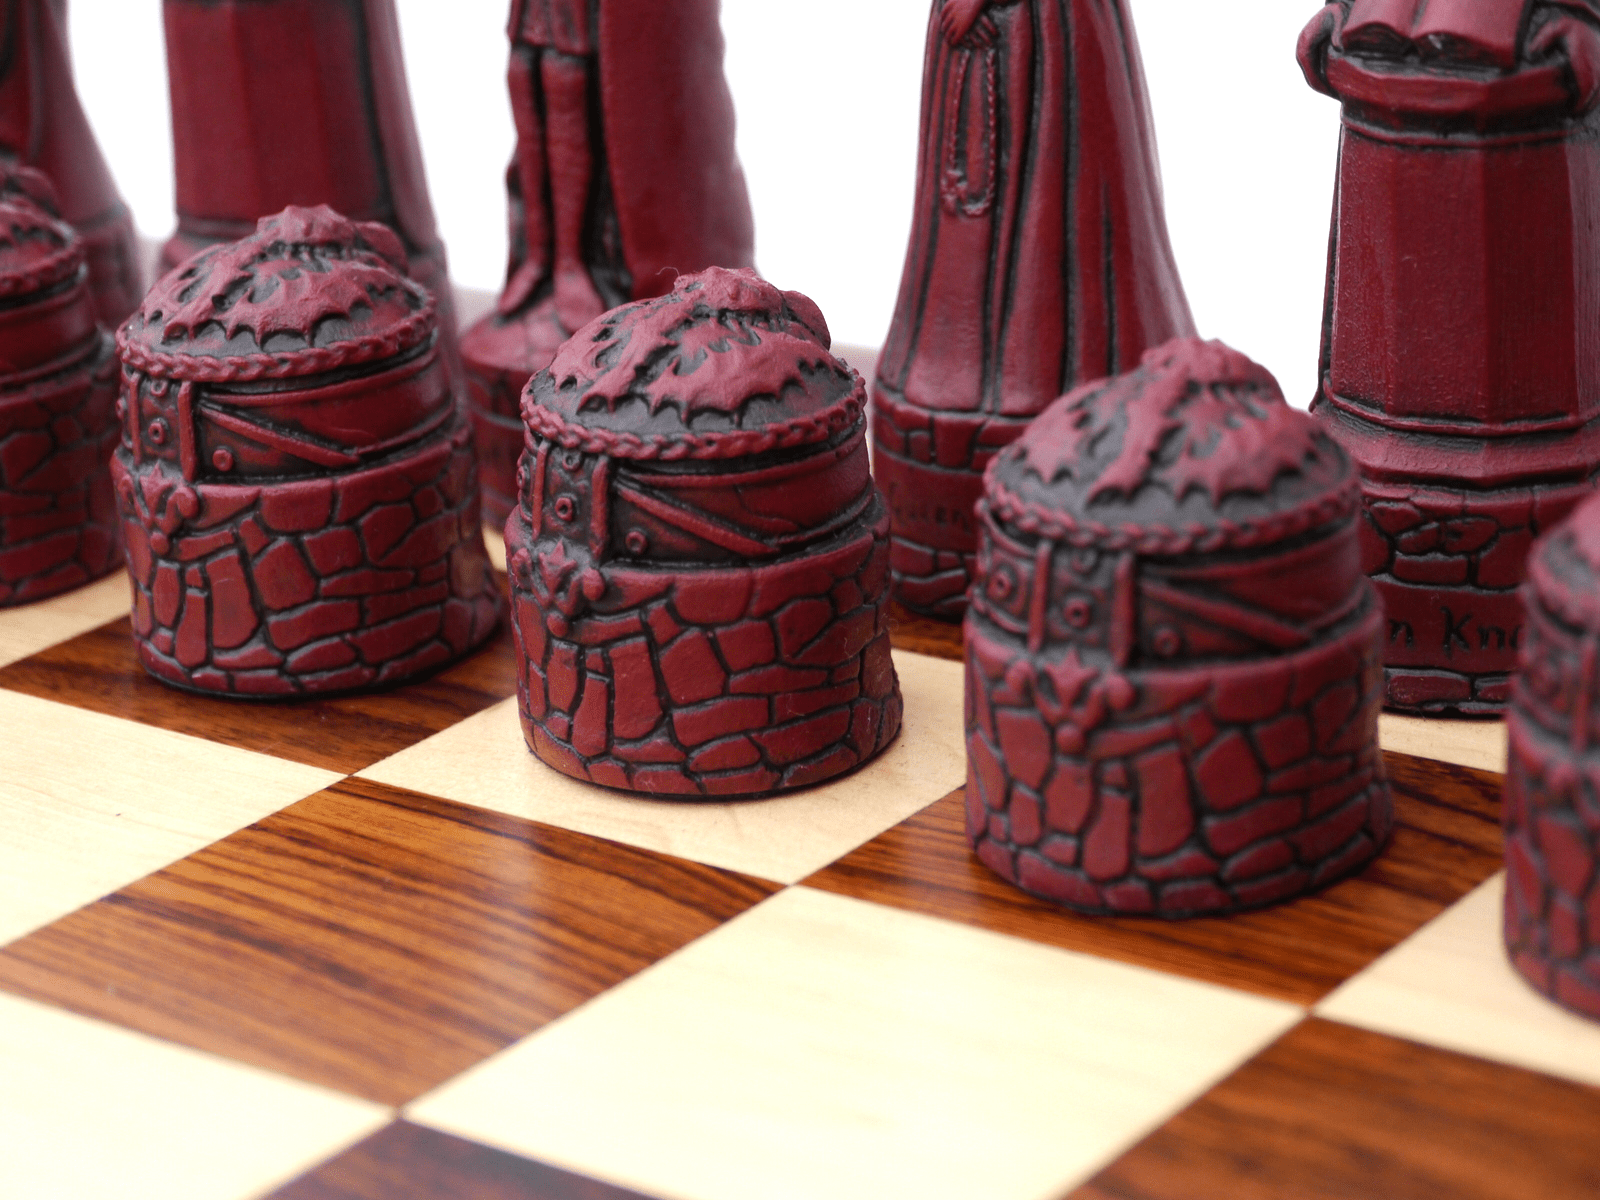 Scottish Chess Pieces by Berkeley - Cardinal Red - Piece - Chess-House